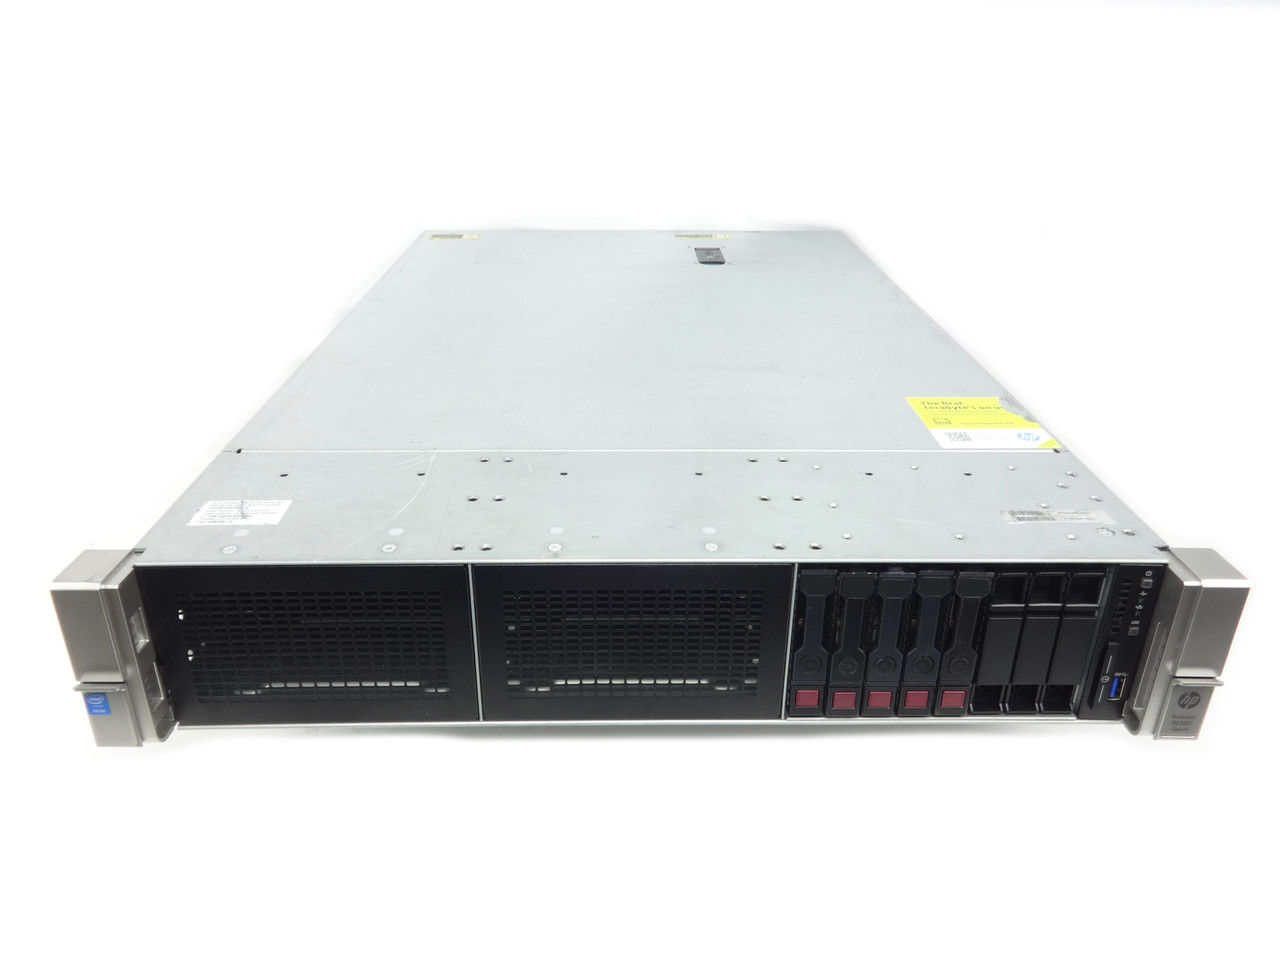 HPE Proliant DL380 G9 8x 2.5" Server Build to Order